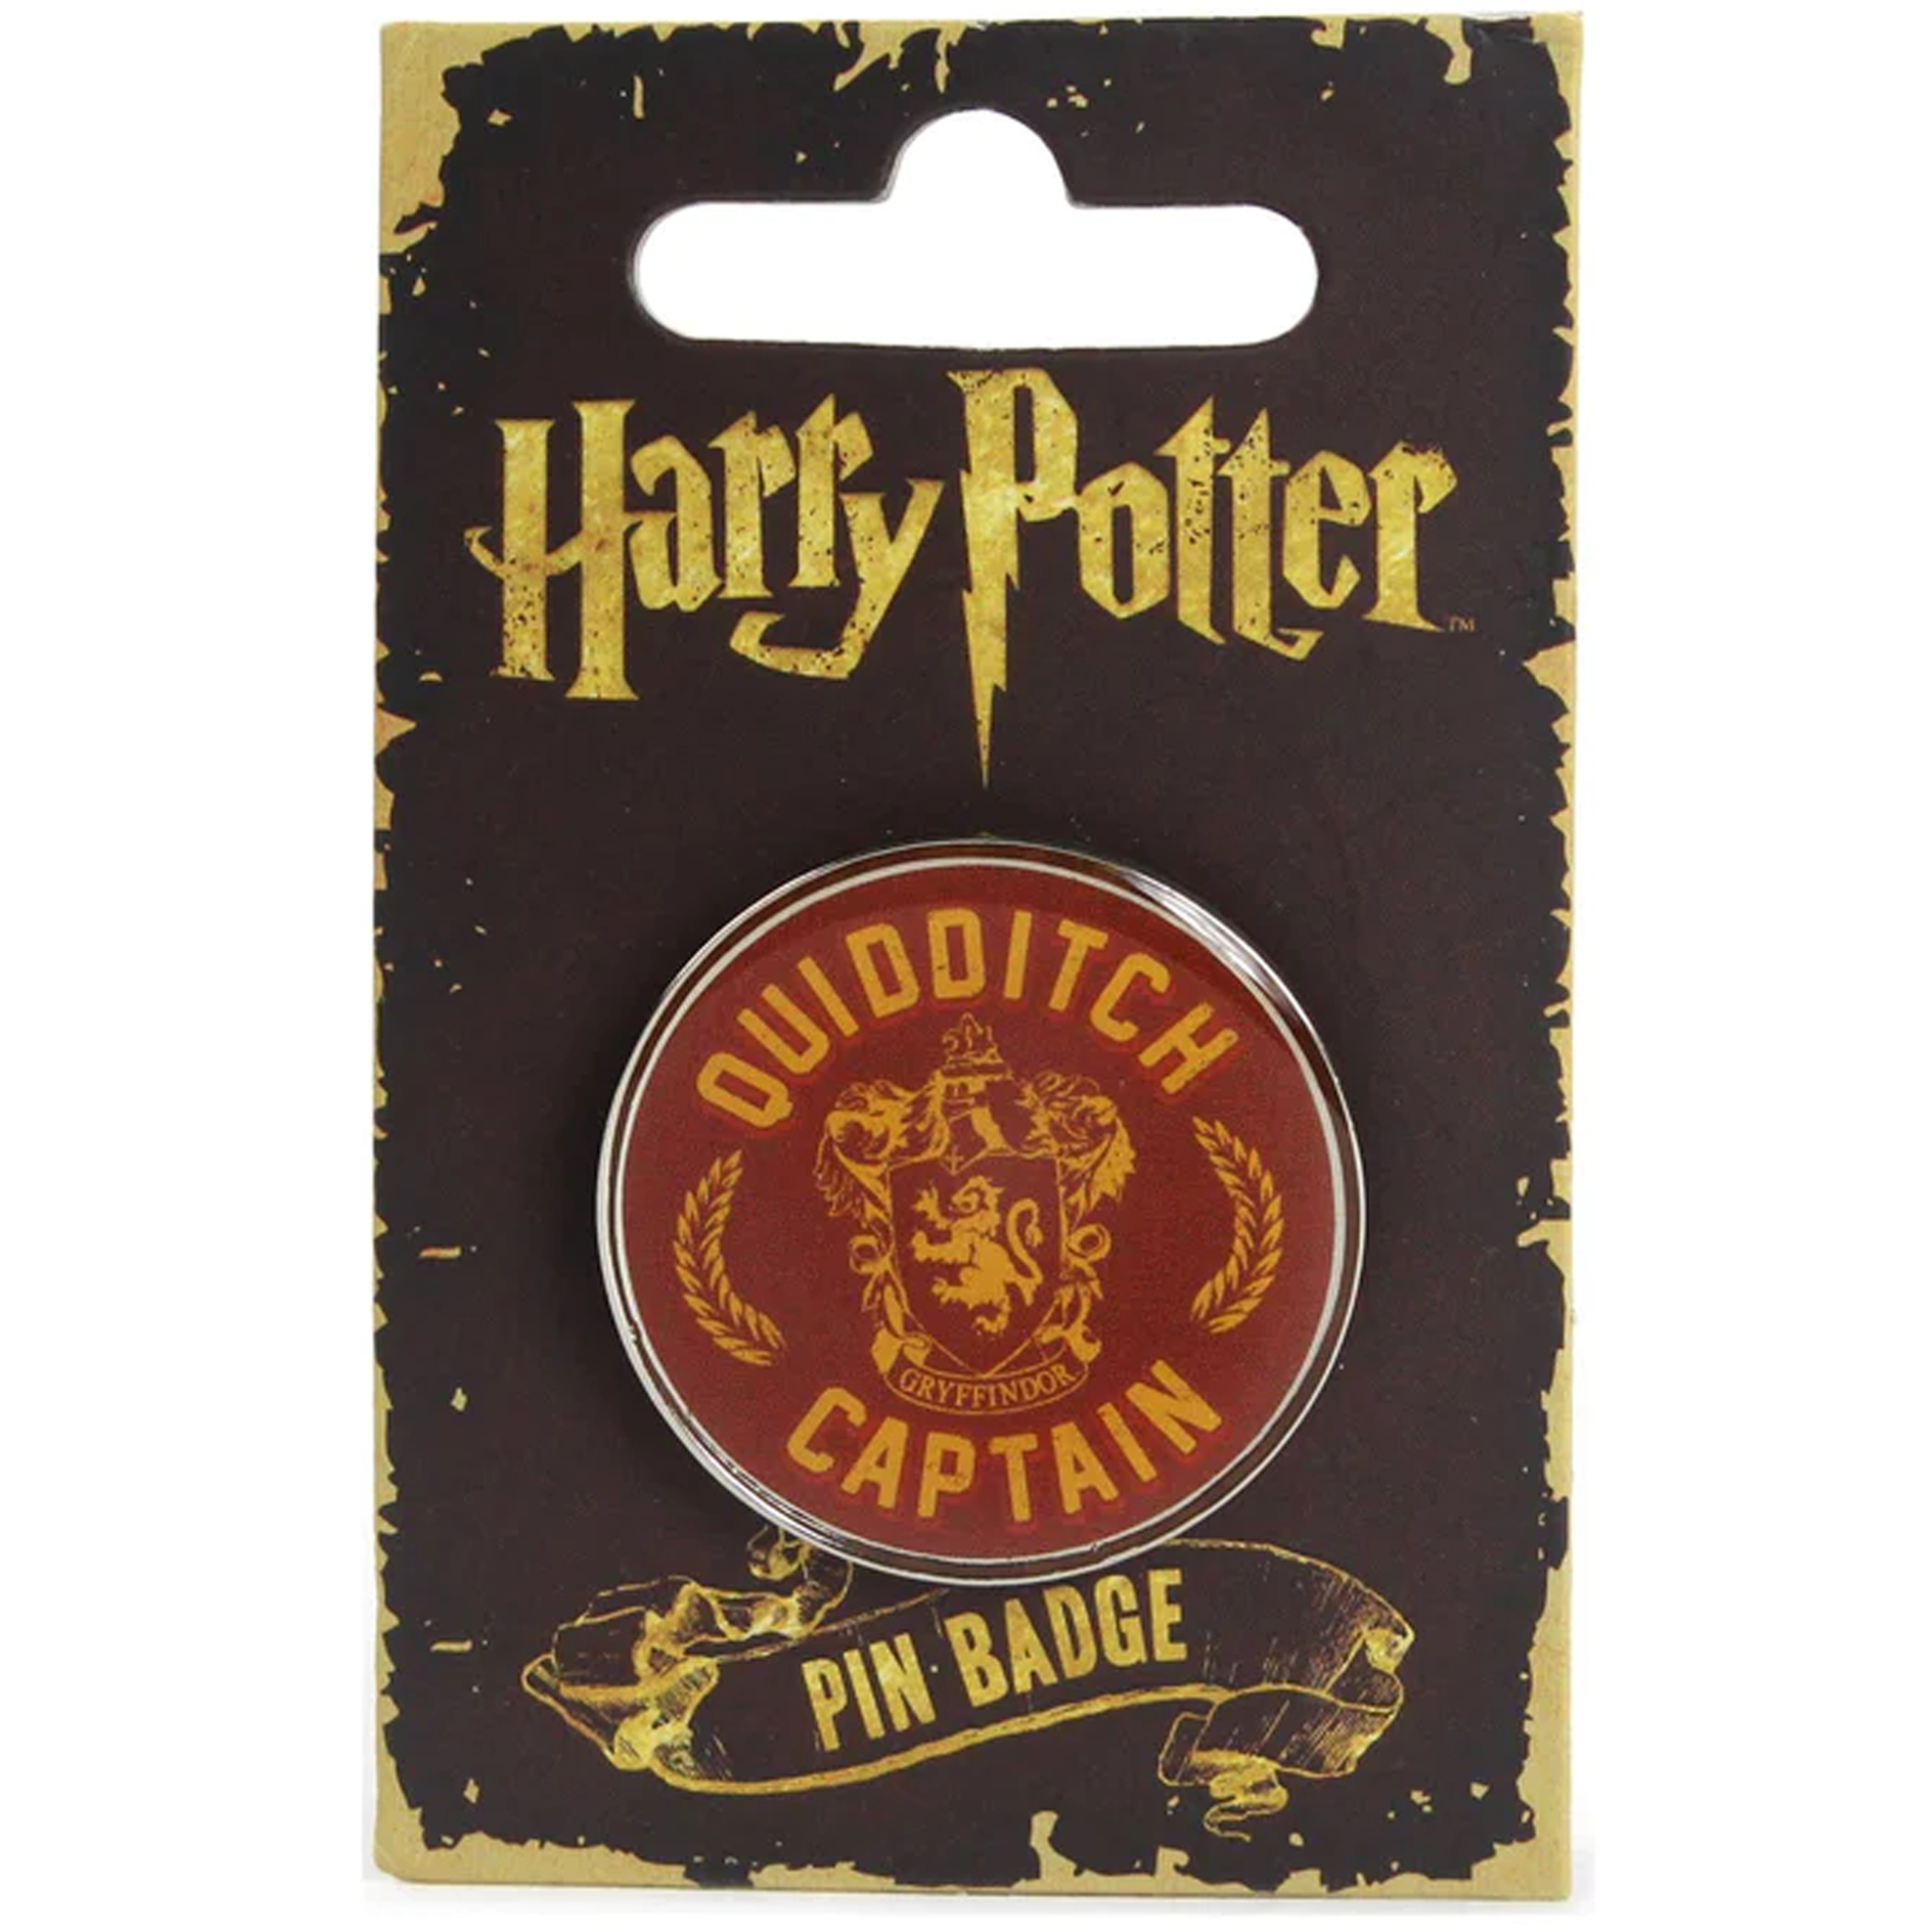 Gryffindor Quidditch Captain Harry Potter Pin Badge (in Packaging) | Happy Piranha